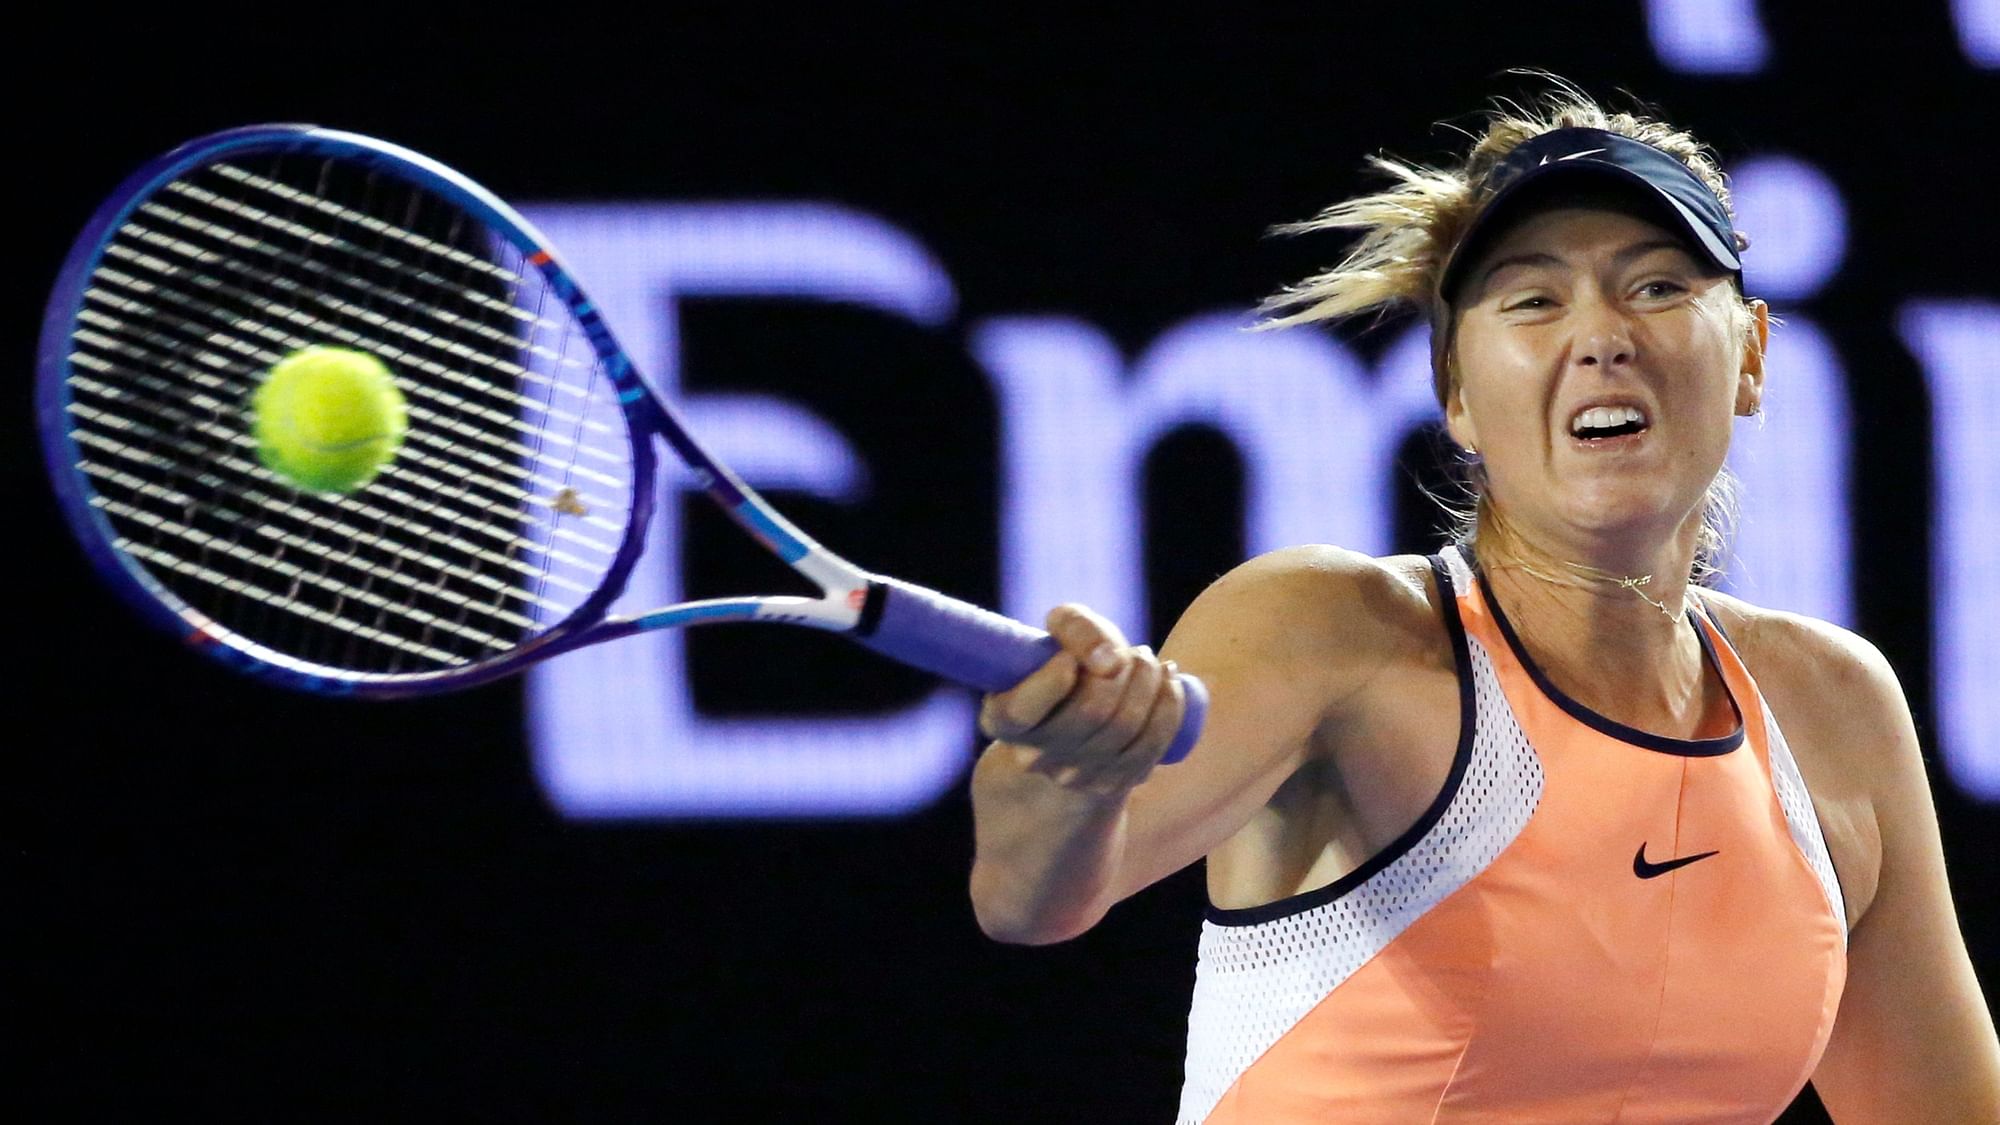 Two-time French Open champion Maria Sharapova pulled out of the year’s second Grand Slam tournament.